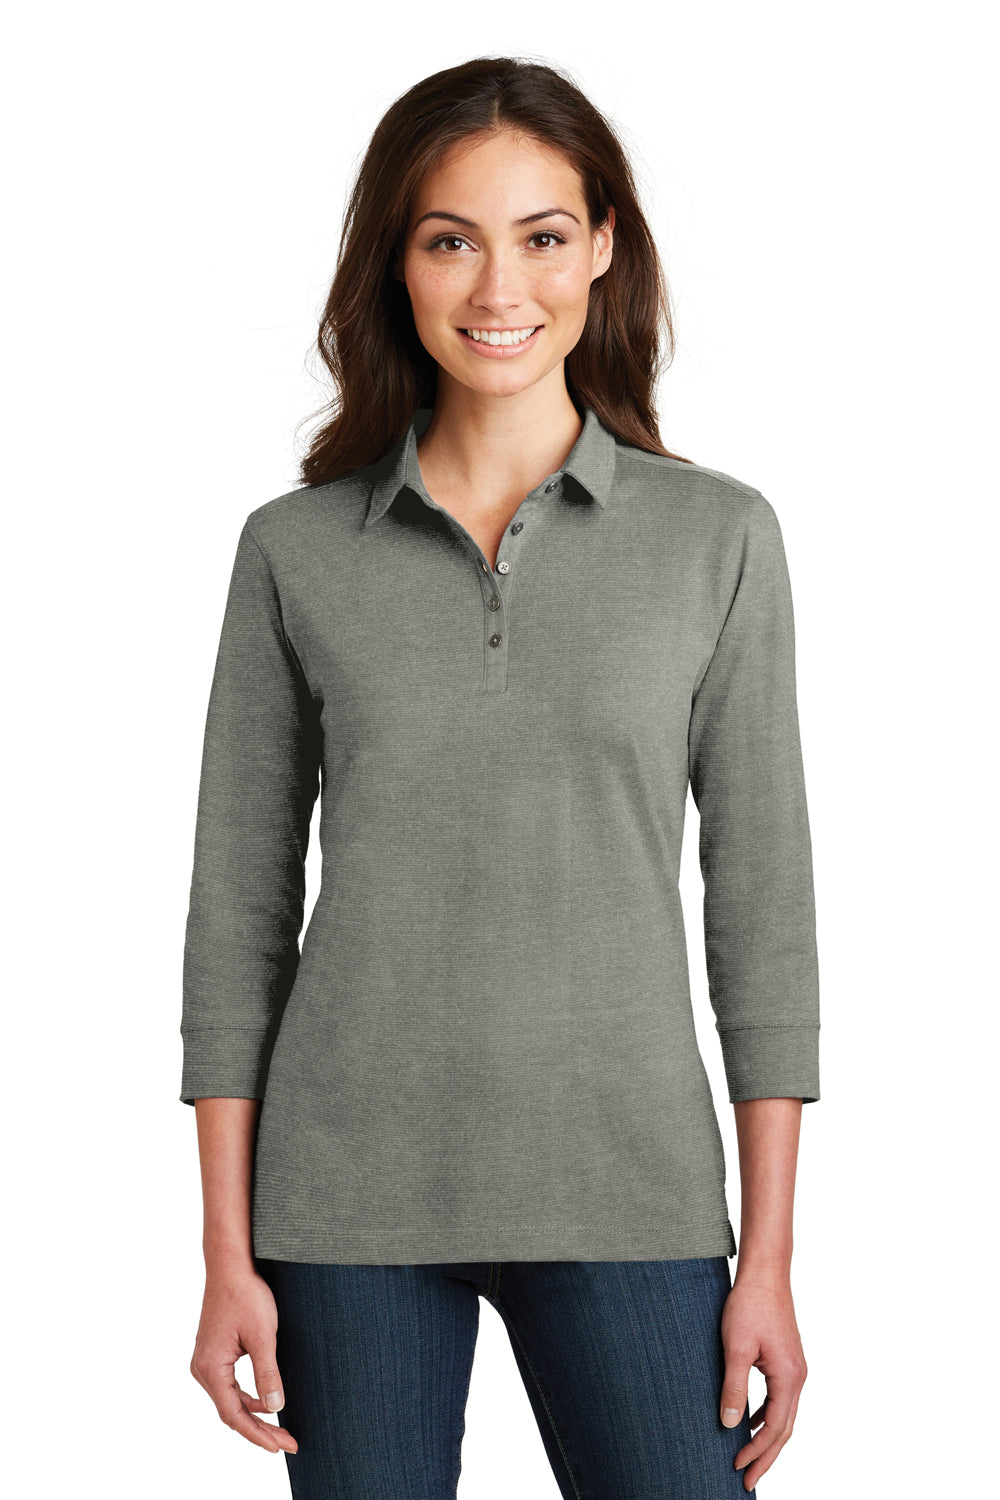 Port Authority L578 Womens Meridian 3/4 Sleeve Polo Shirt Monument Grey Front